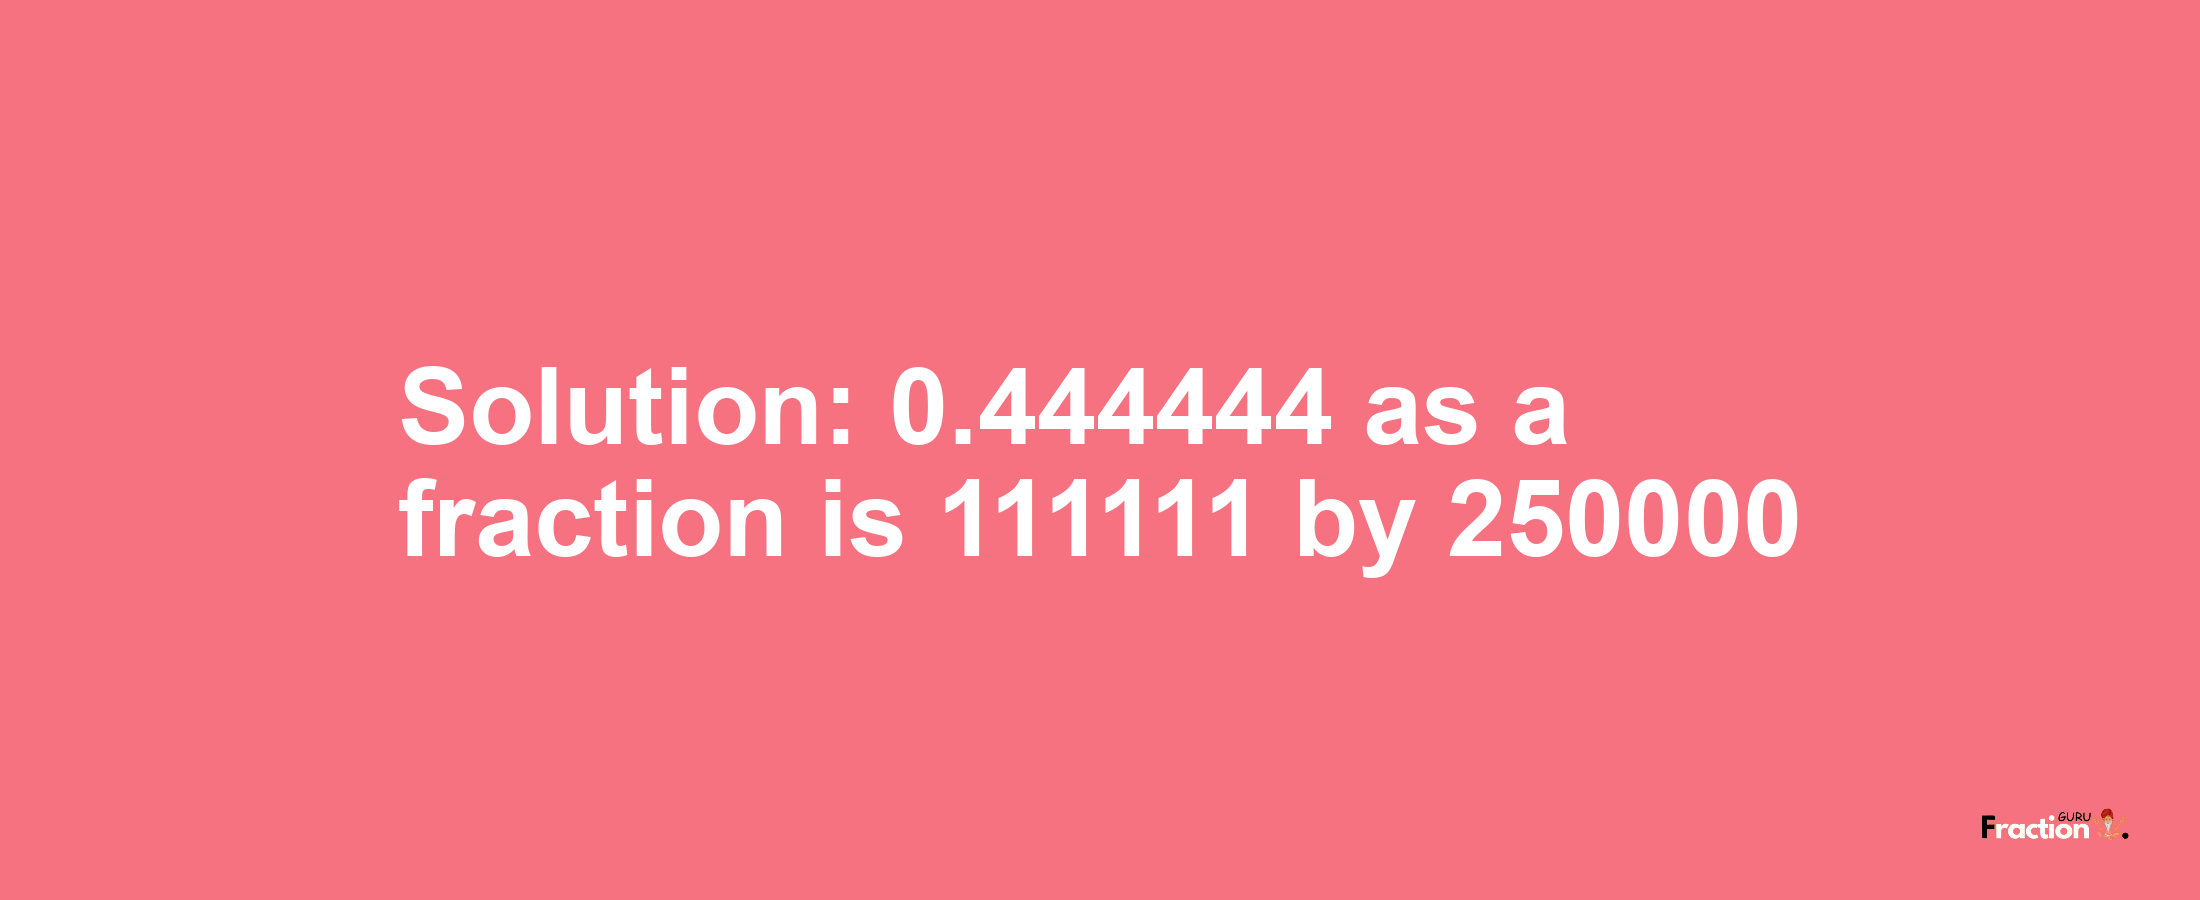 Solution:0.444444 as a fraction is 111111/250000